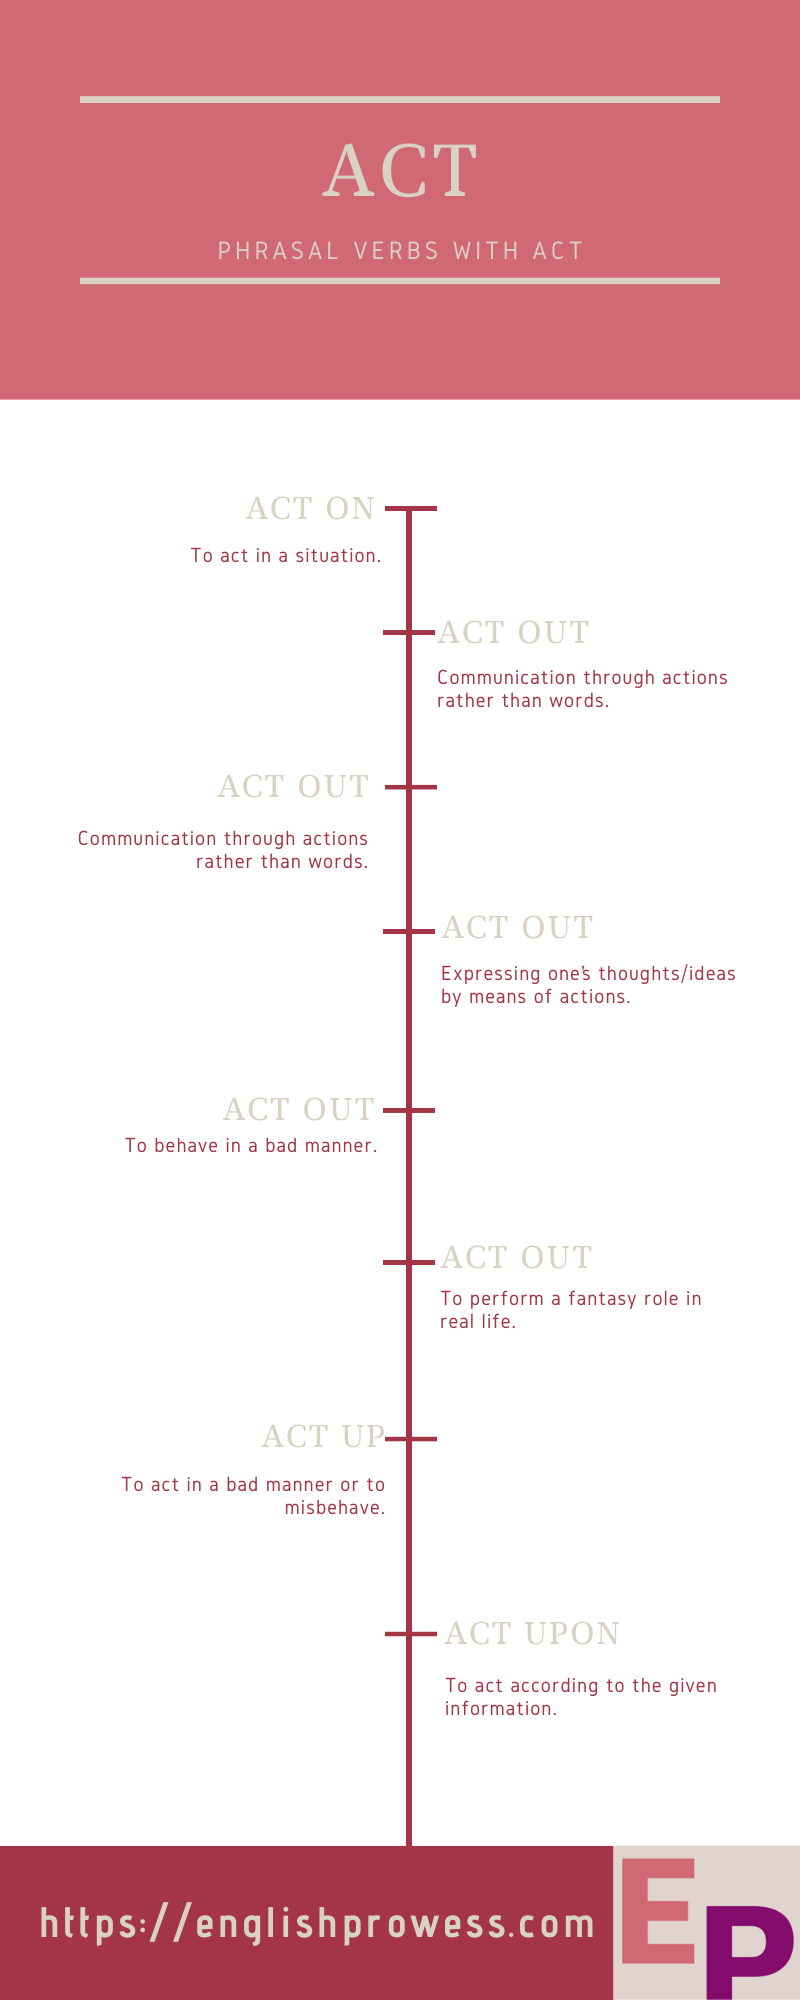 Phrasal verbs with act